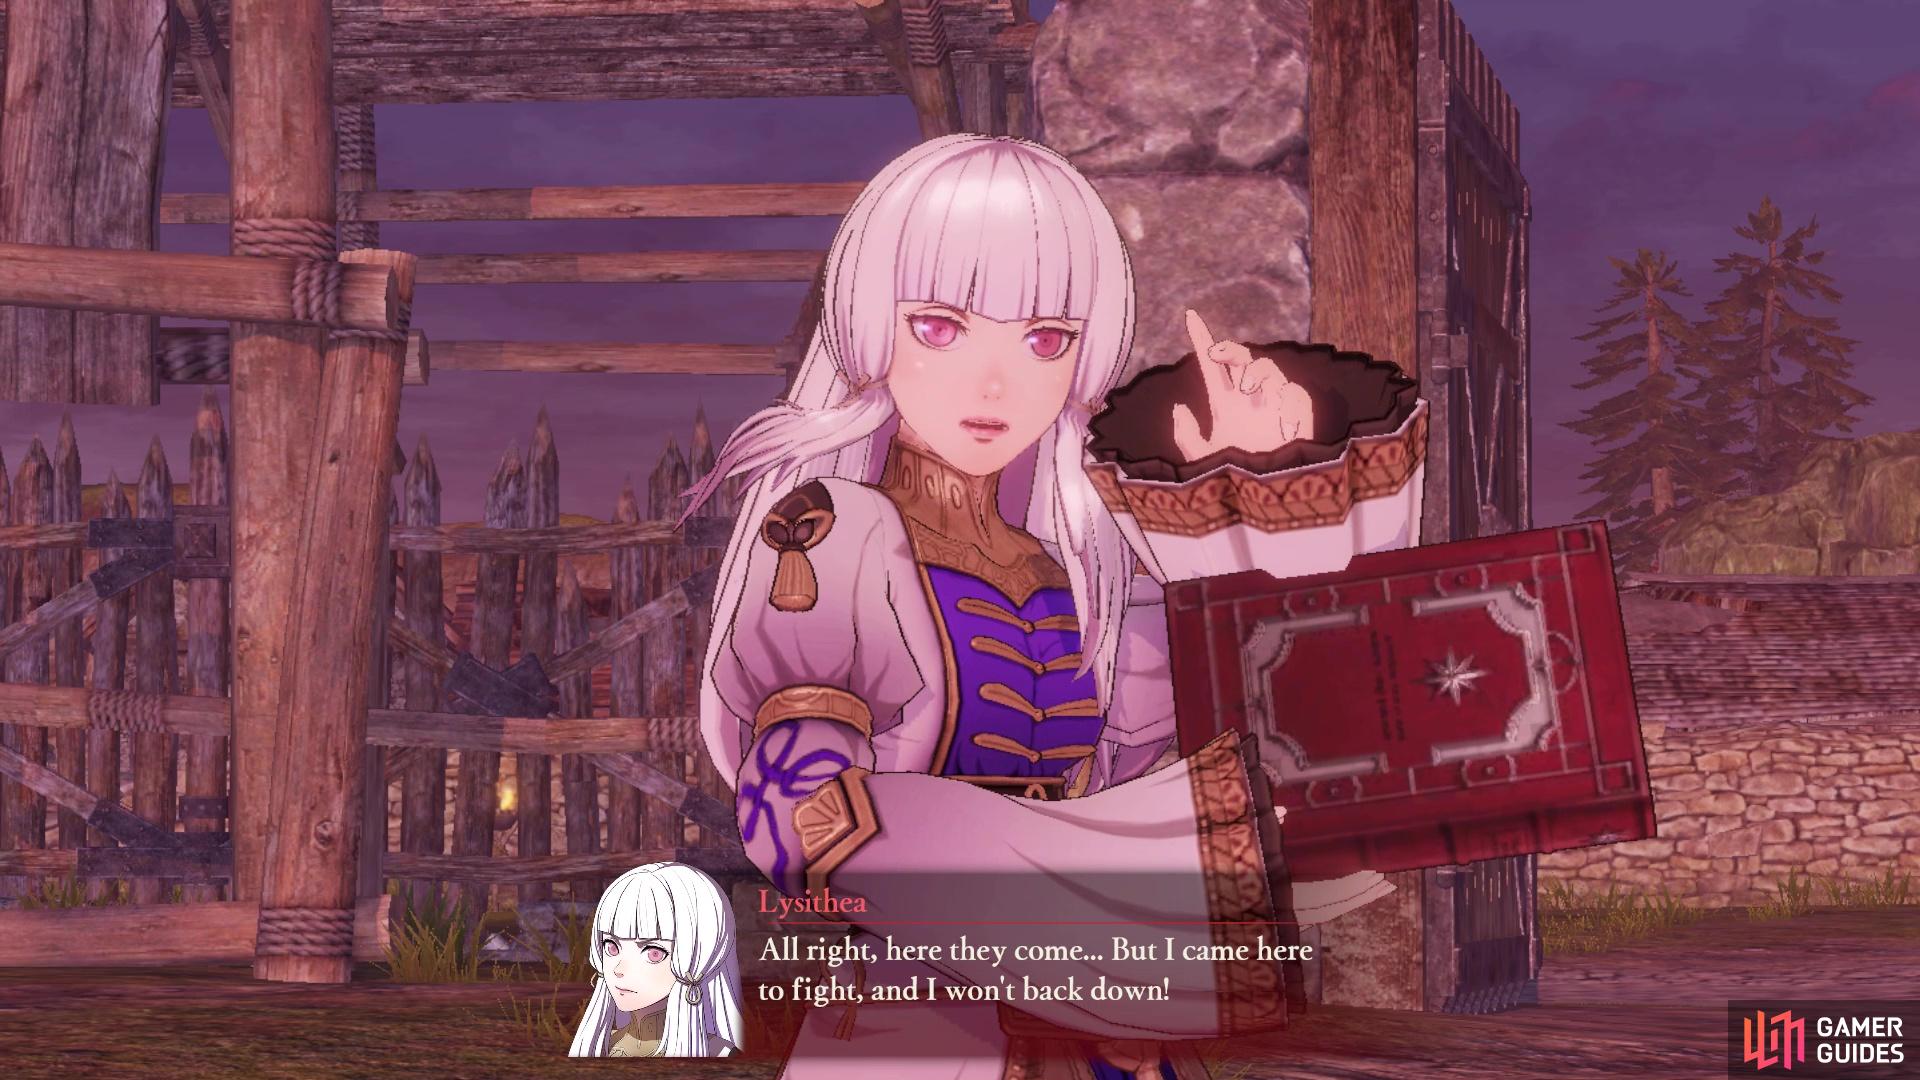 Lysithea is who you will be facing in the eastern one